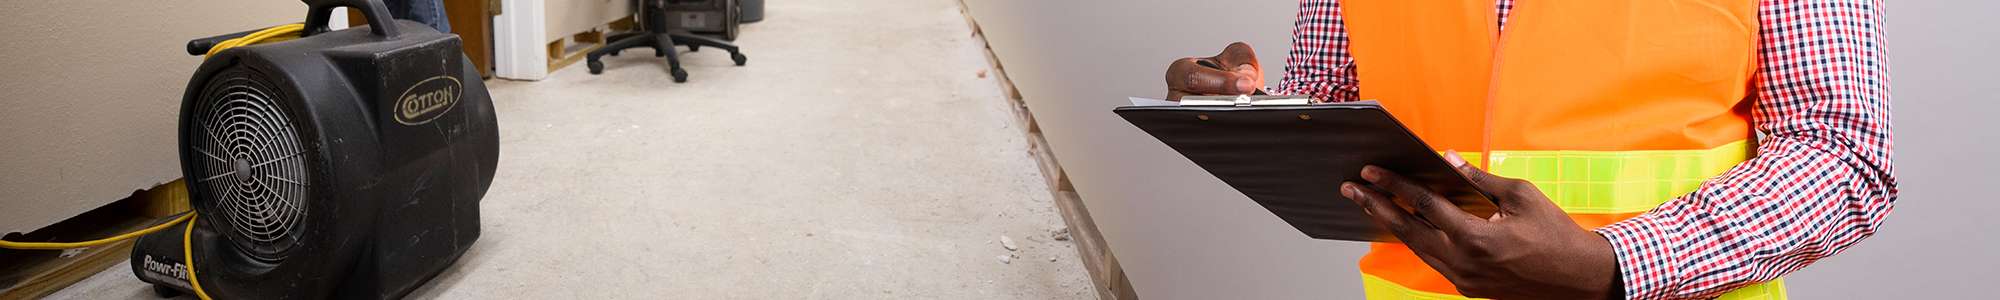 8 tips for picking a water damage restoration company